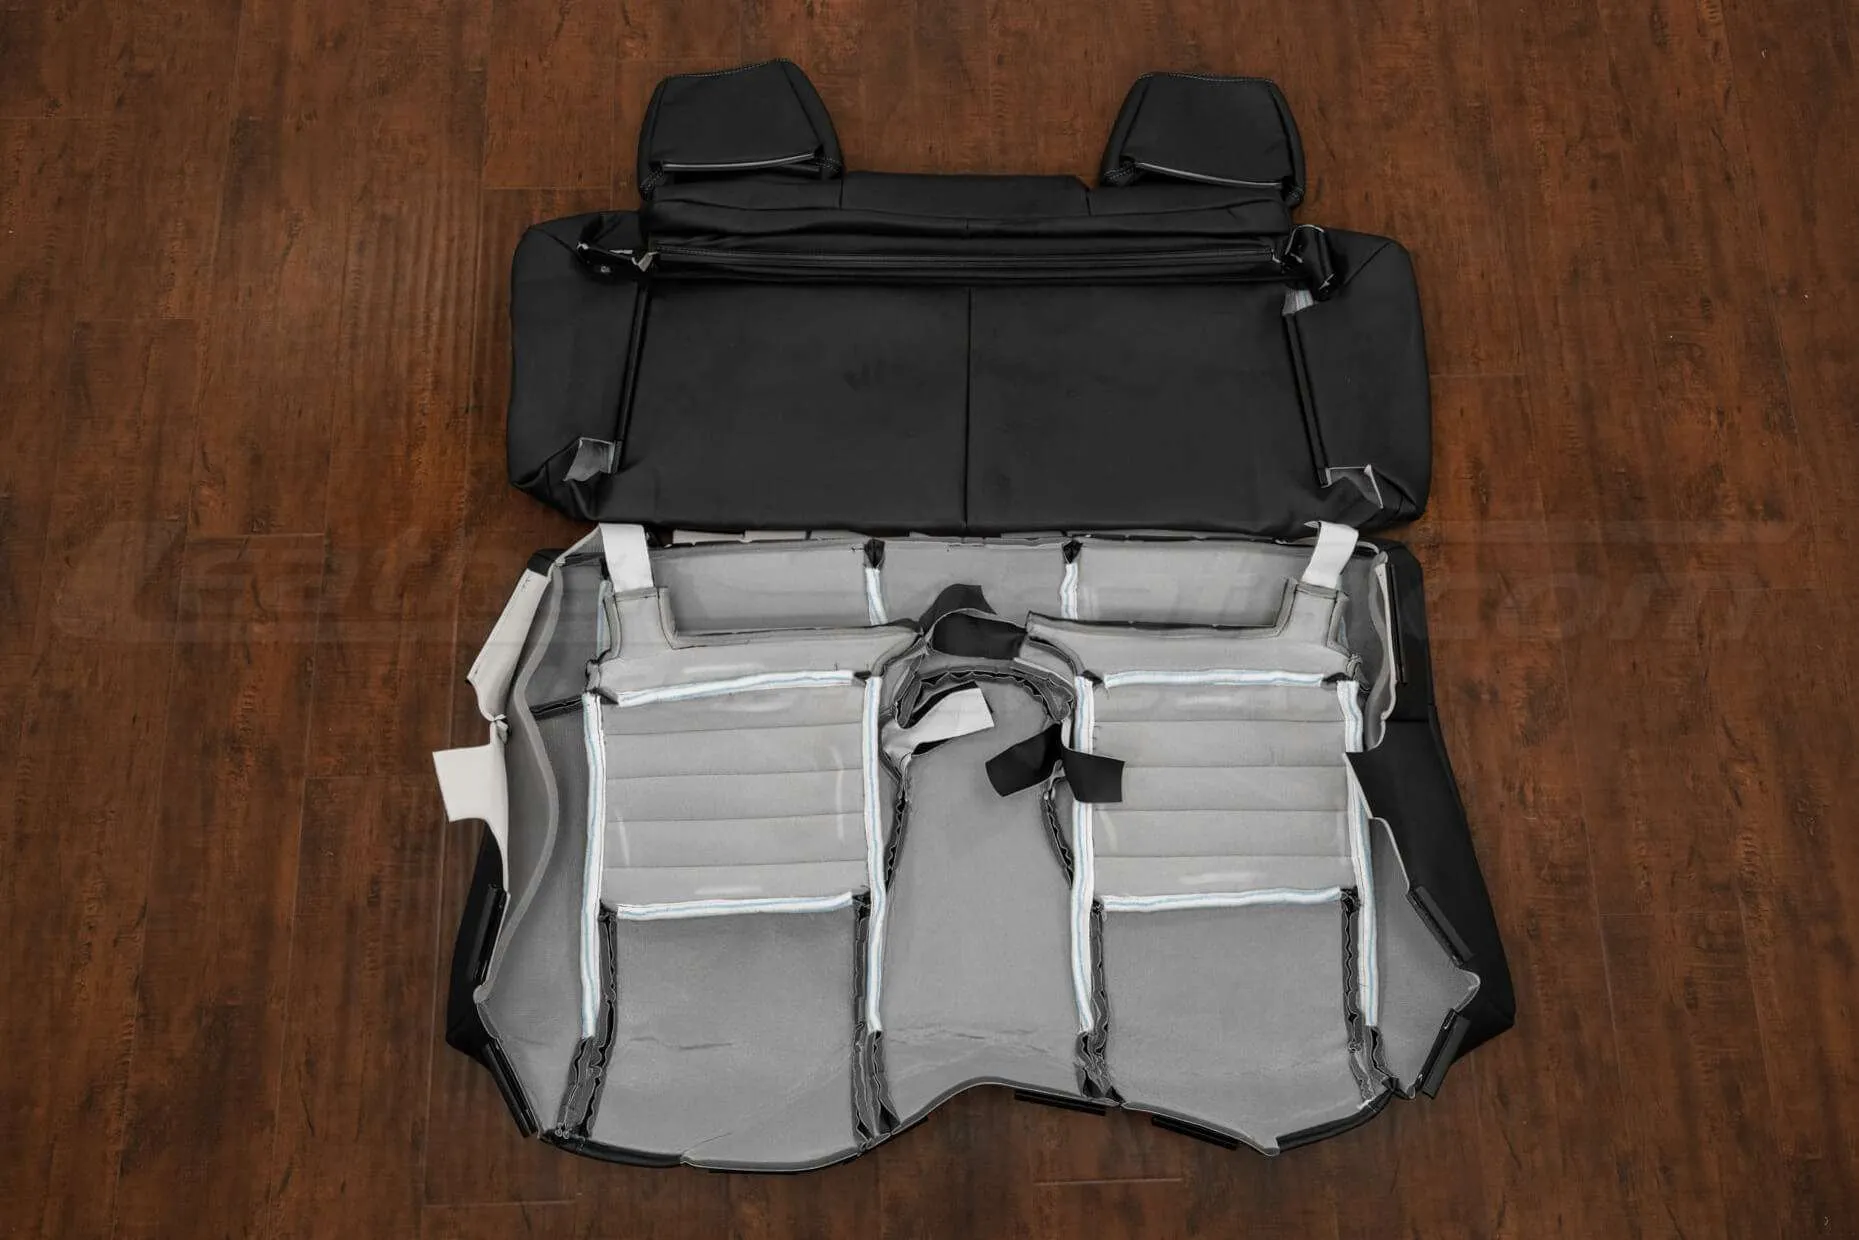 13-14 Ford Mustang Upholstery Kit - Black - Back view of rear seats